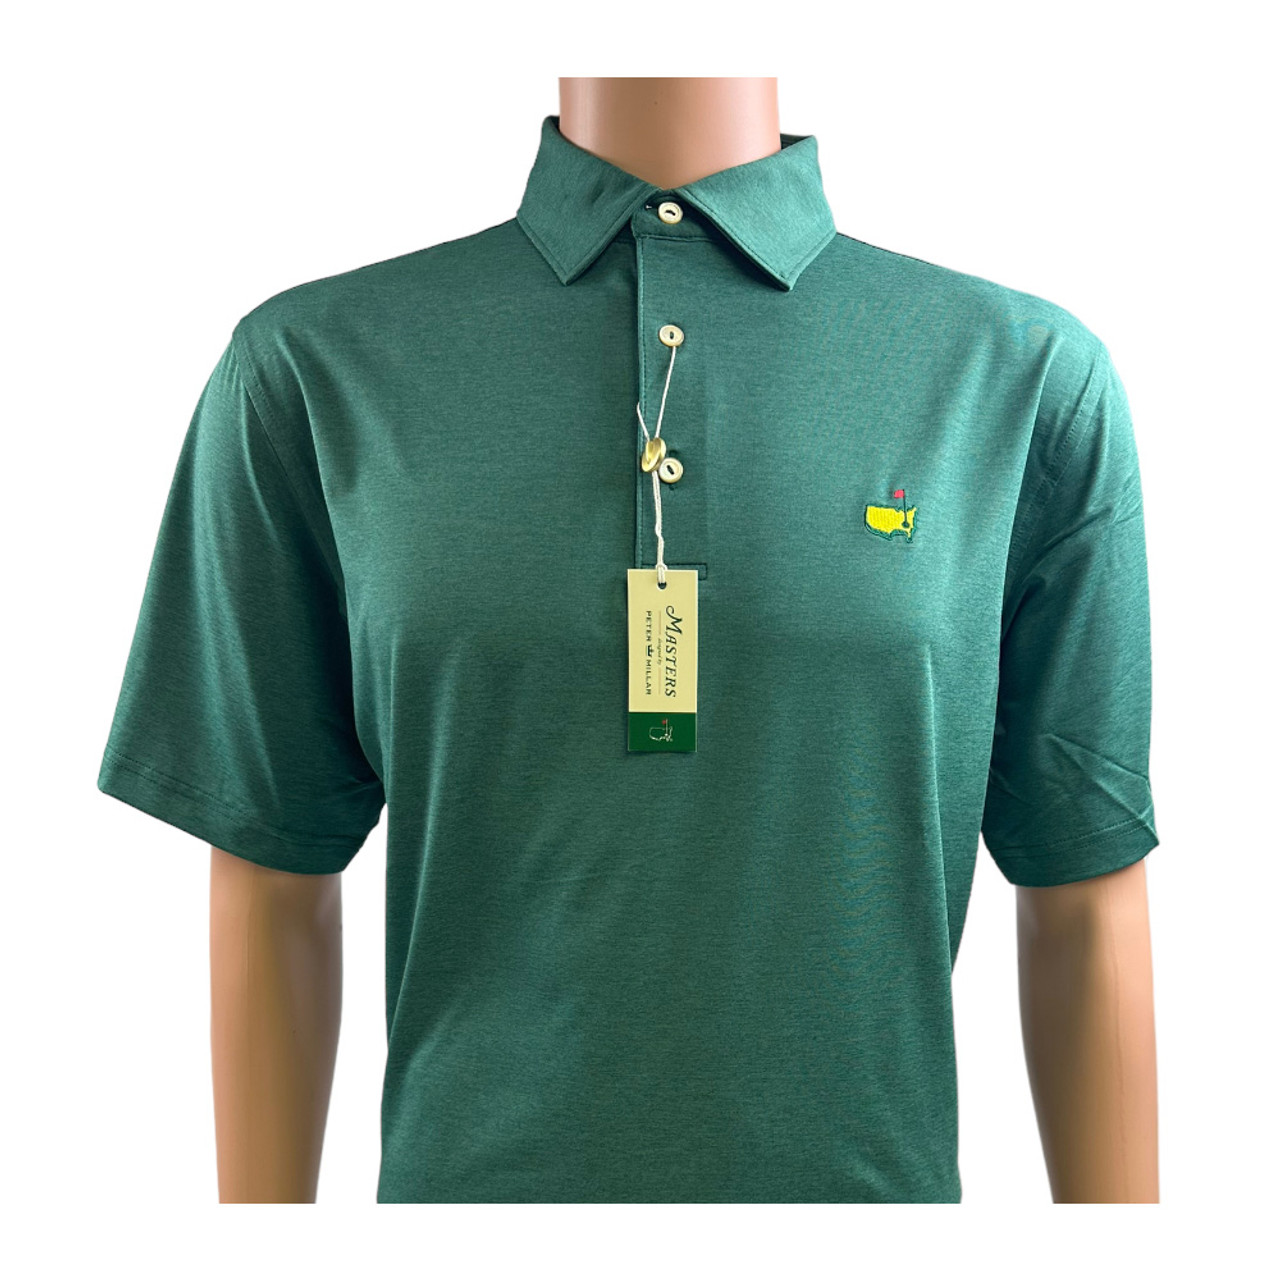 Masters Men's Peter Millar Concessions Performance Tech Golf Polo Shirt NEW